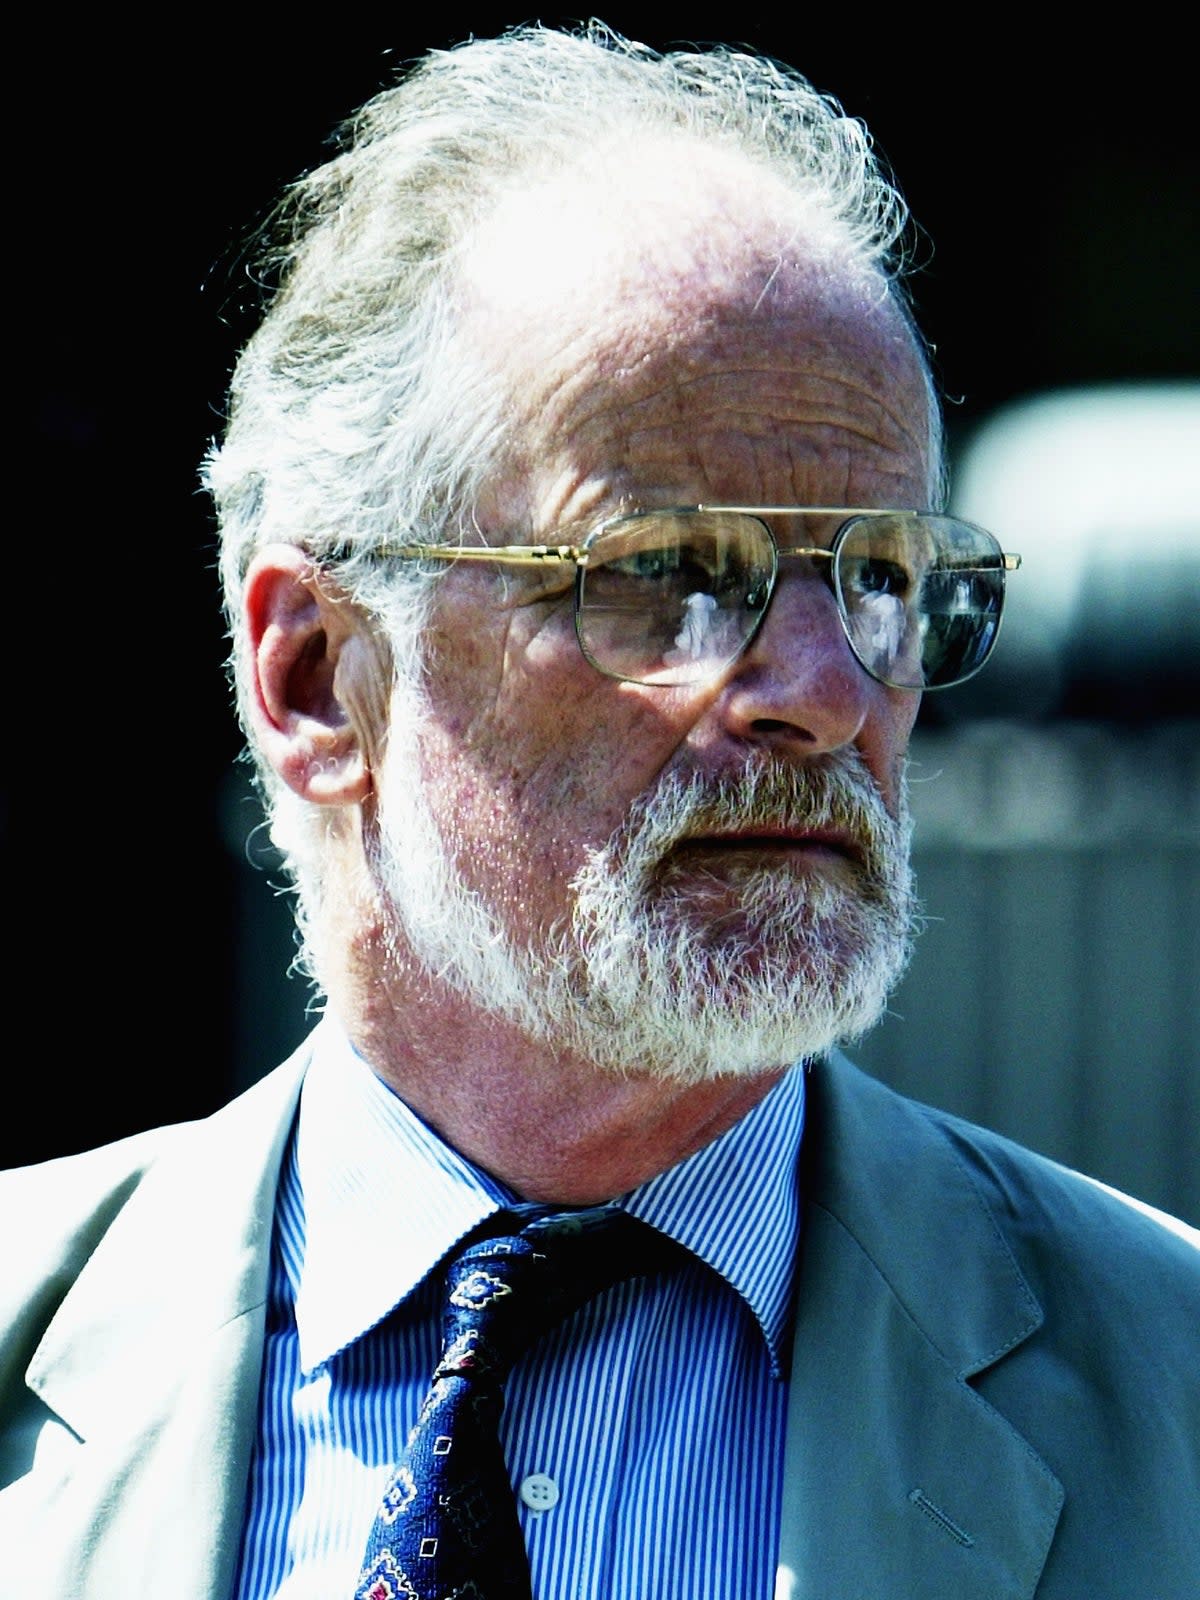 David Kelly arrives at the House of Commons in July 2003 (Getty)